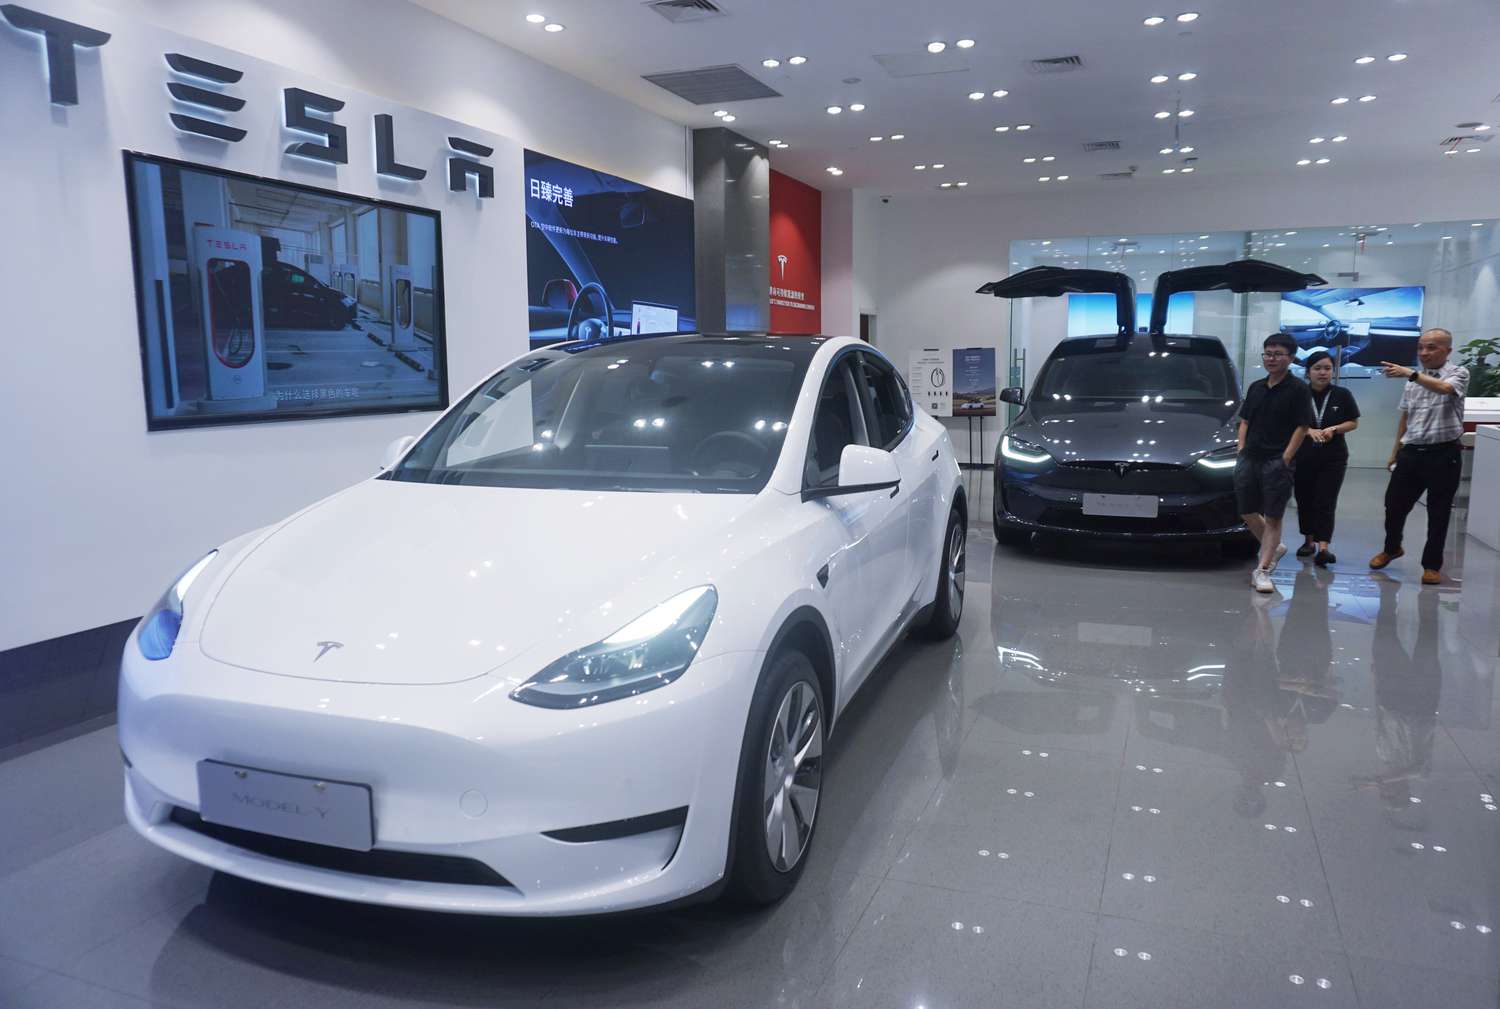 EV Giant Tesla Faces Big Challenges in China As the Stock Price Keeps Falling